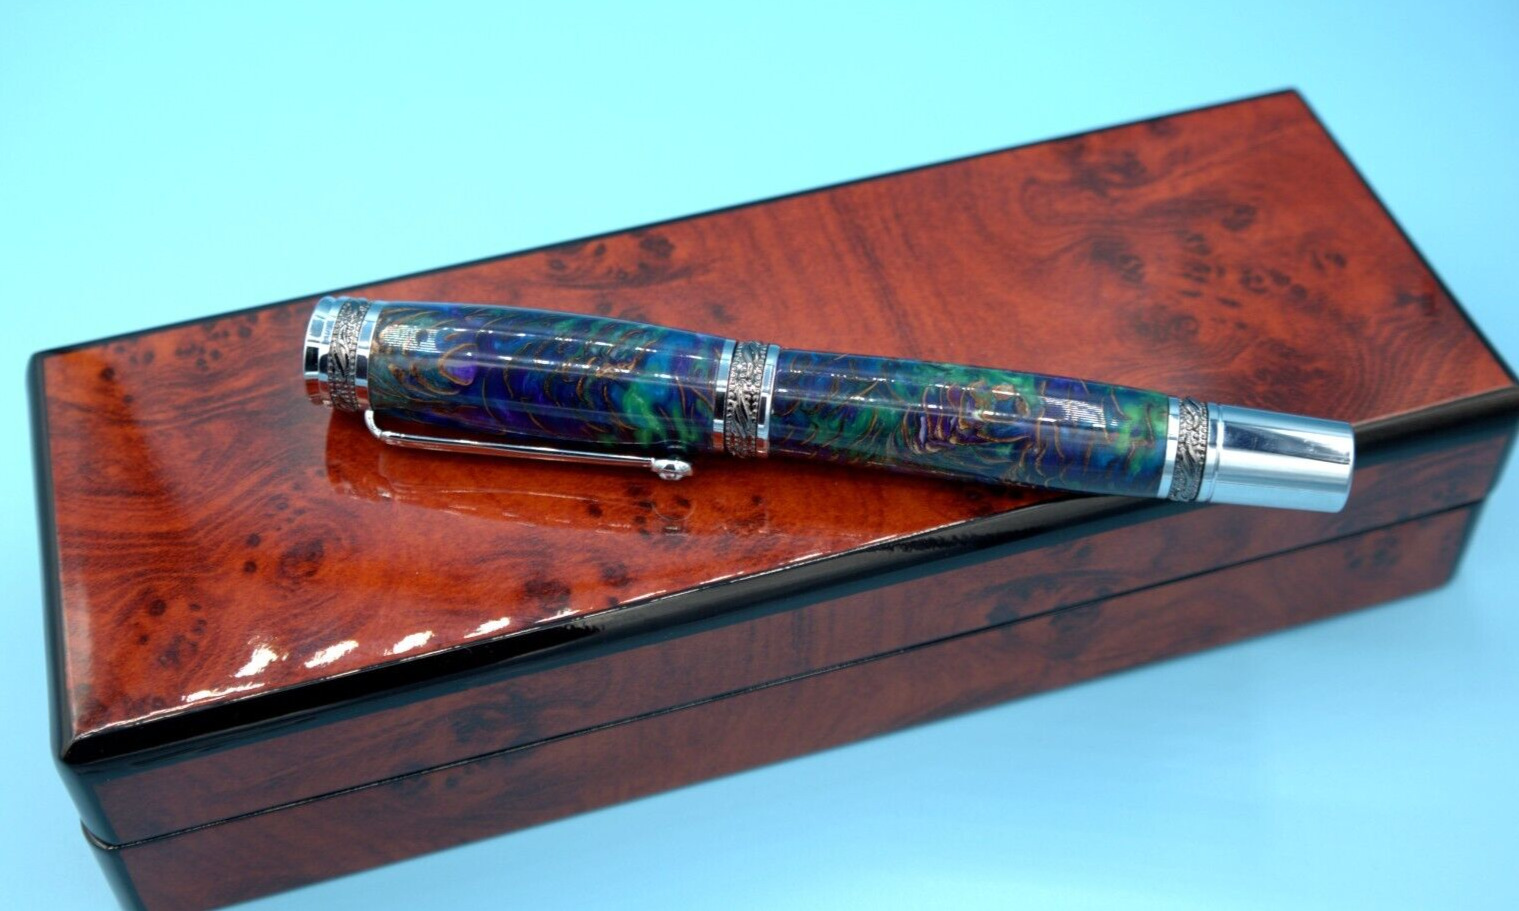 Blue/Green Majestic Rollerball Pen in Chrome & Gun Metal Embedded Pine Cones